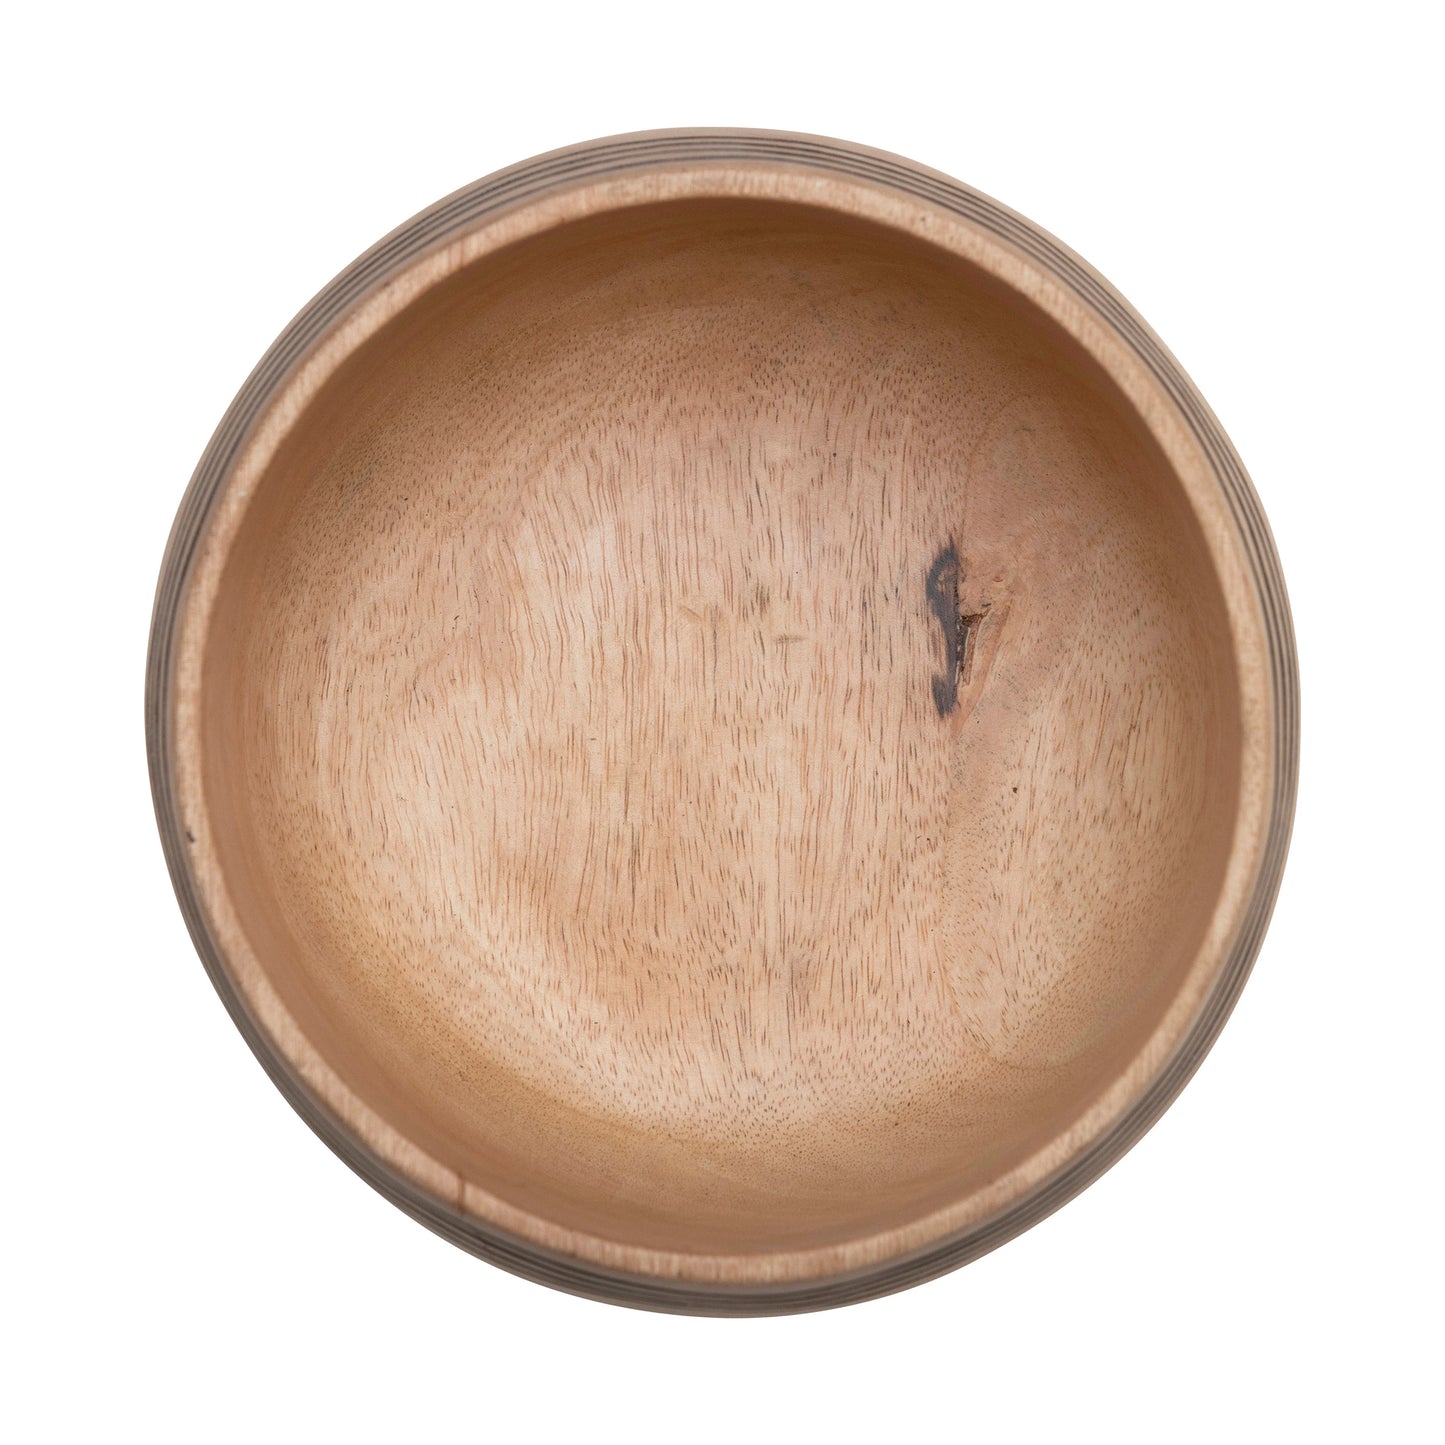 Mango wood grooved bowl with stripes